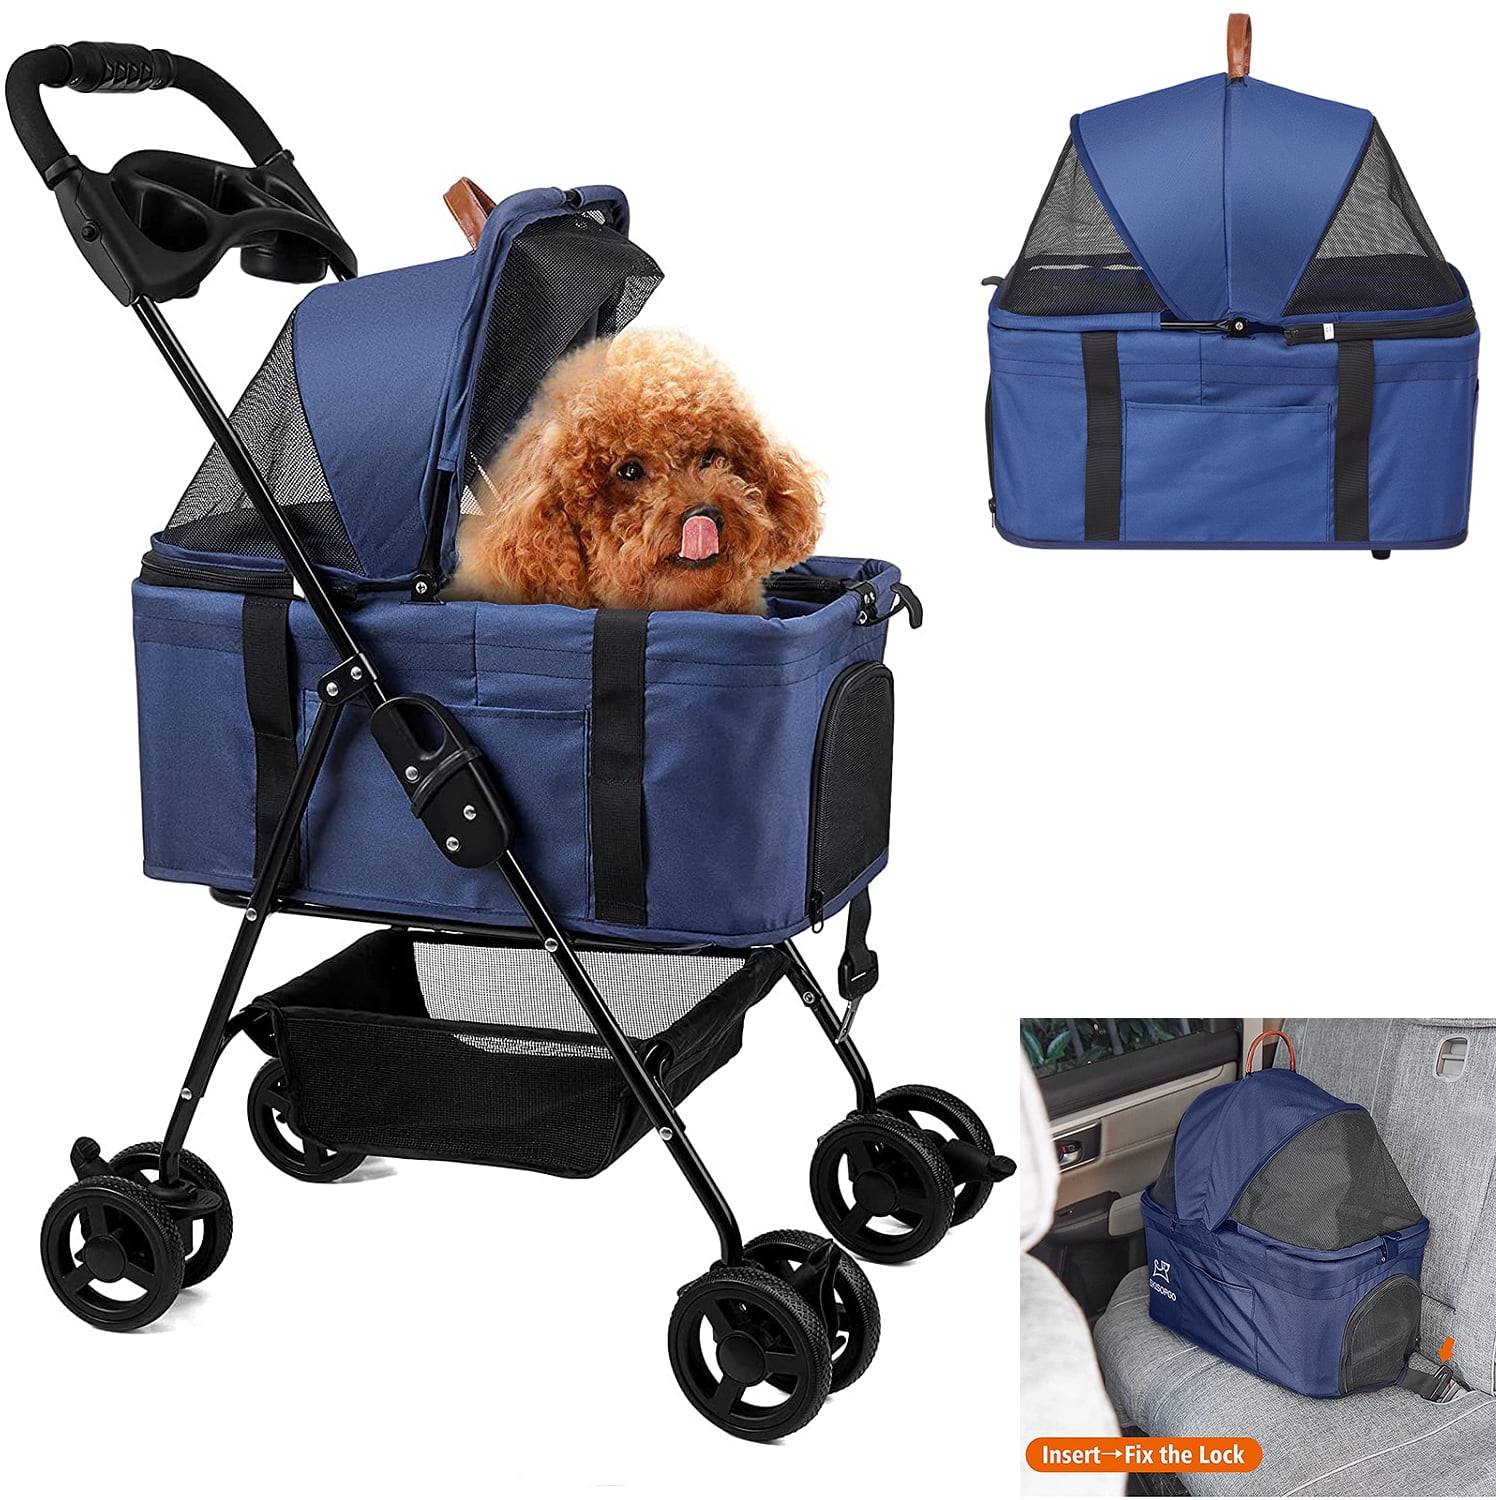 Dog Pet Cat Stroller CL.Store Dog Stroller Pet Cat 4 Wheels Folding with Cup Holder Durable Waterproof Strollers Portable Travel Strolling Cart wZippered Mesh Windows & Pad Canopy,Teal